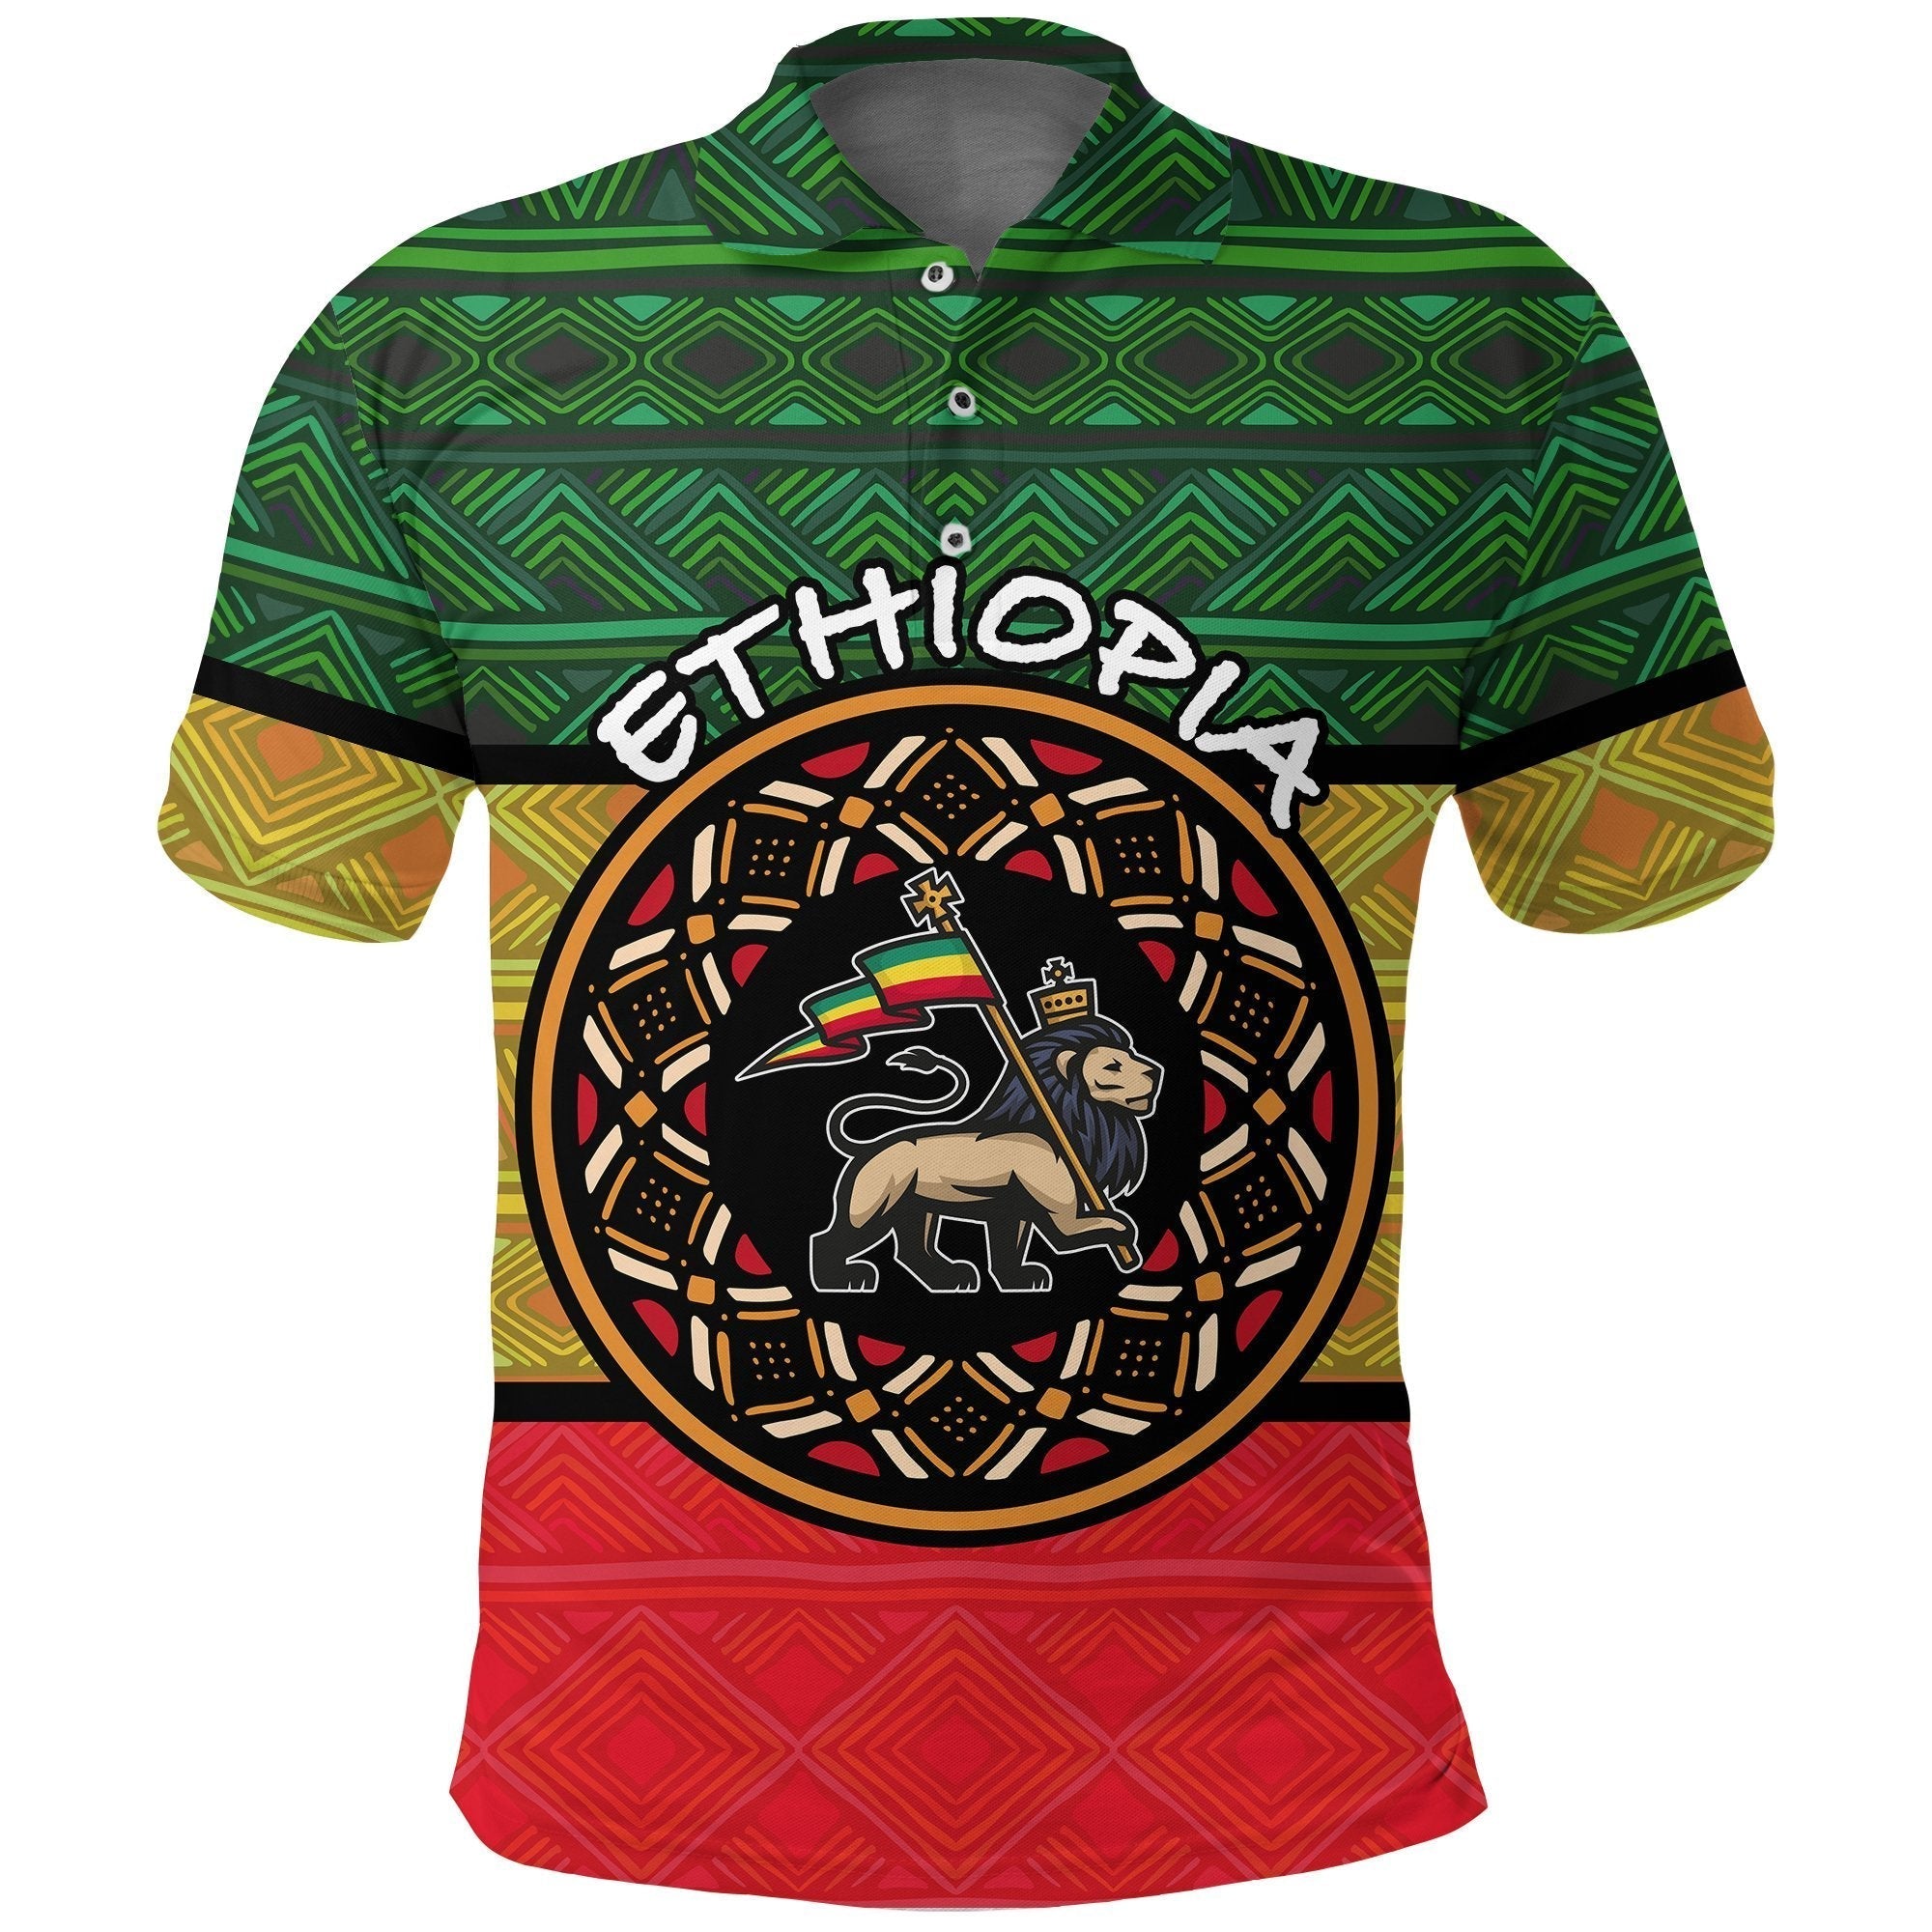 ethiopia-polo-shirt-african-geometric-ornament-patterns